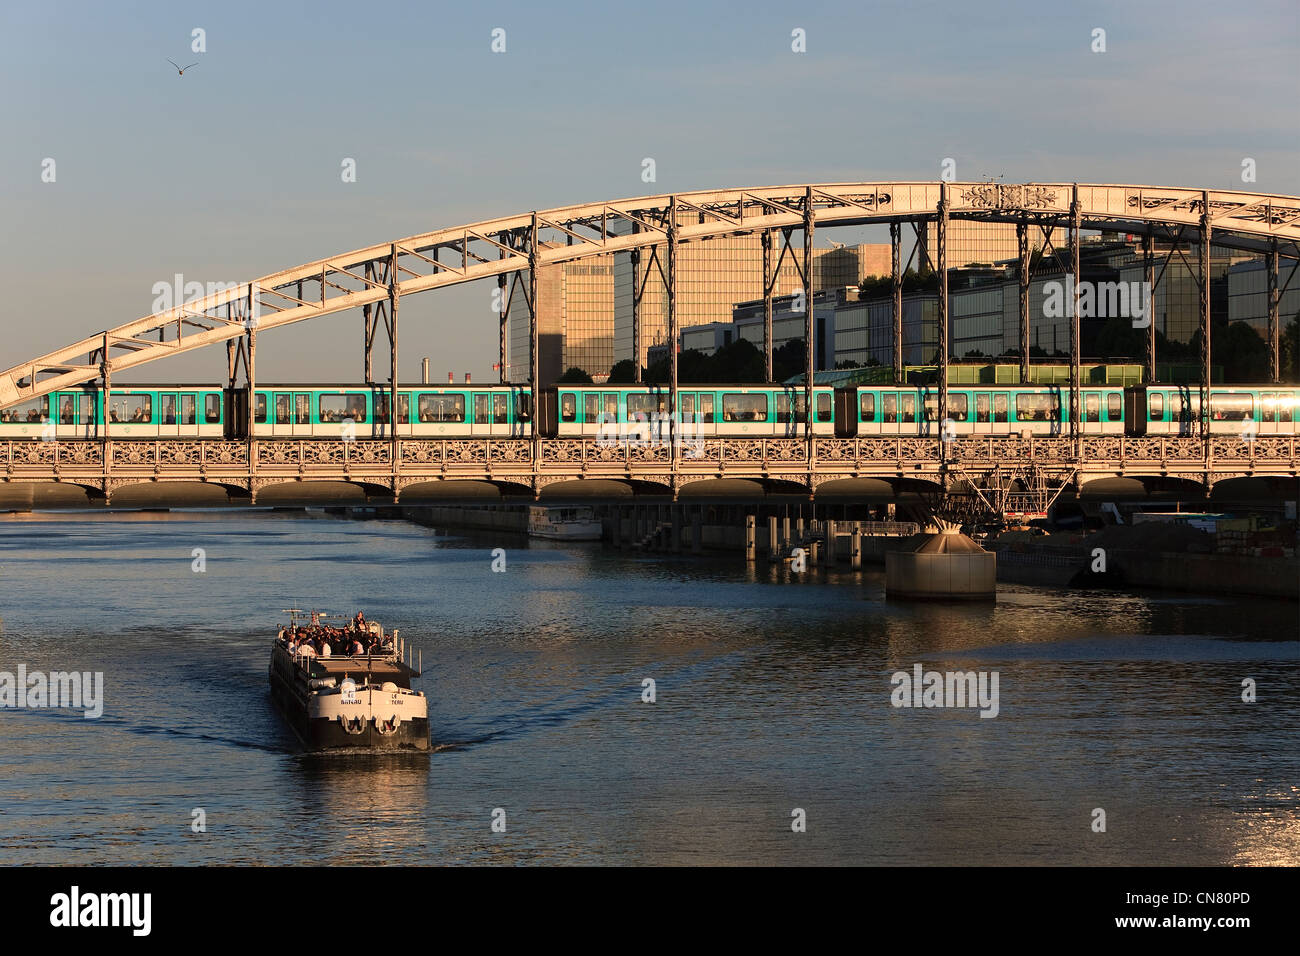 France, Paris, boats on the Seine river under the Viaduc d'Austerlitz, line 5 of the Metro and Bibliotheque Nationale de France Stock Photo